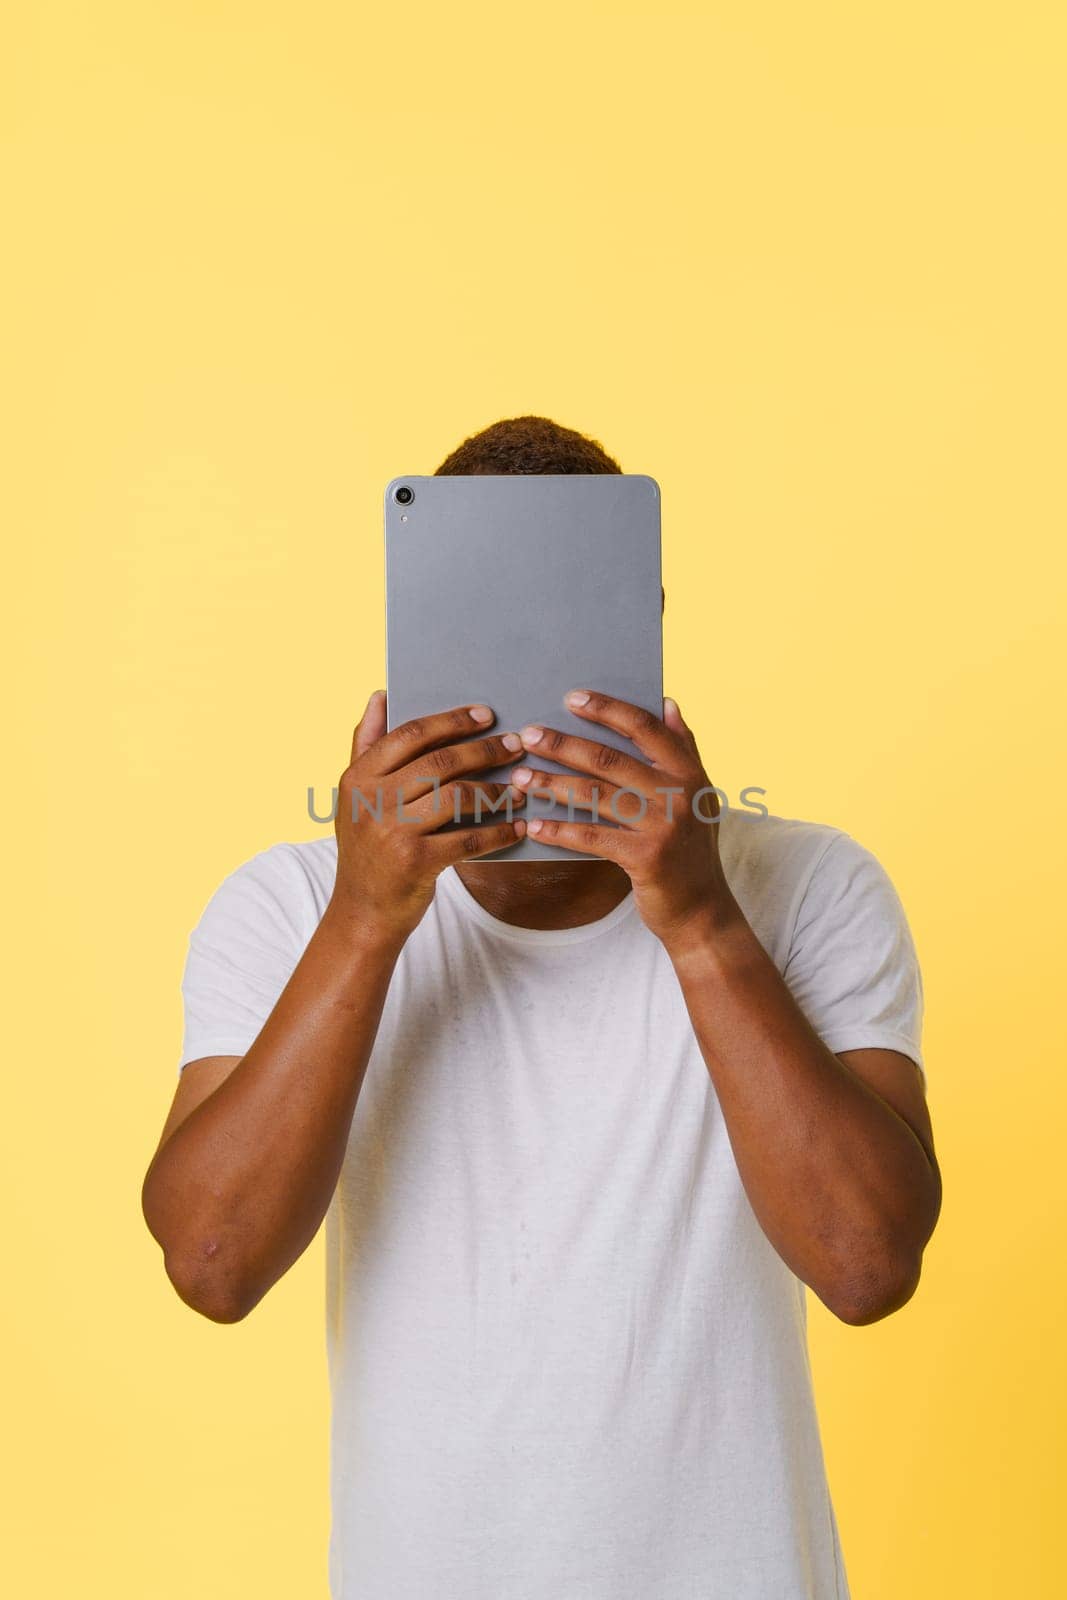 Anonymity incognito online concept. Anonymous African American person holding tablet PC in hands, with hidden face isolated on bright yellow background with copy space for designers to add their own text or graphics. High quality photo